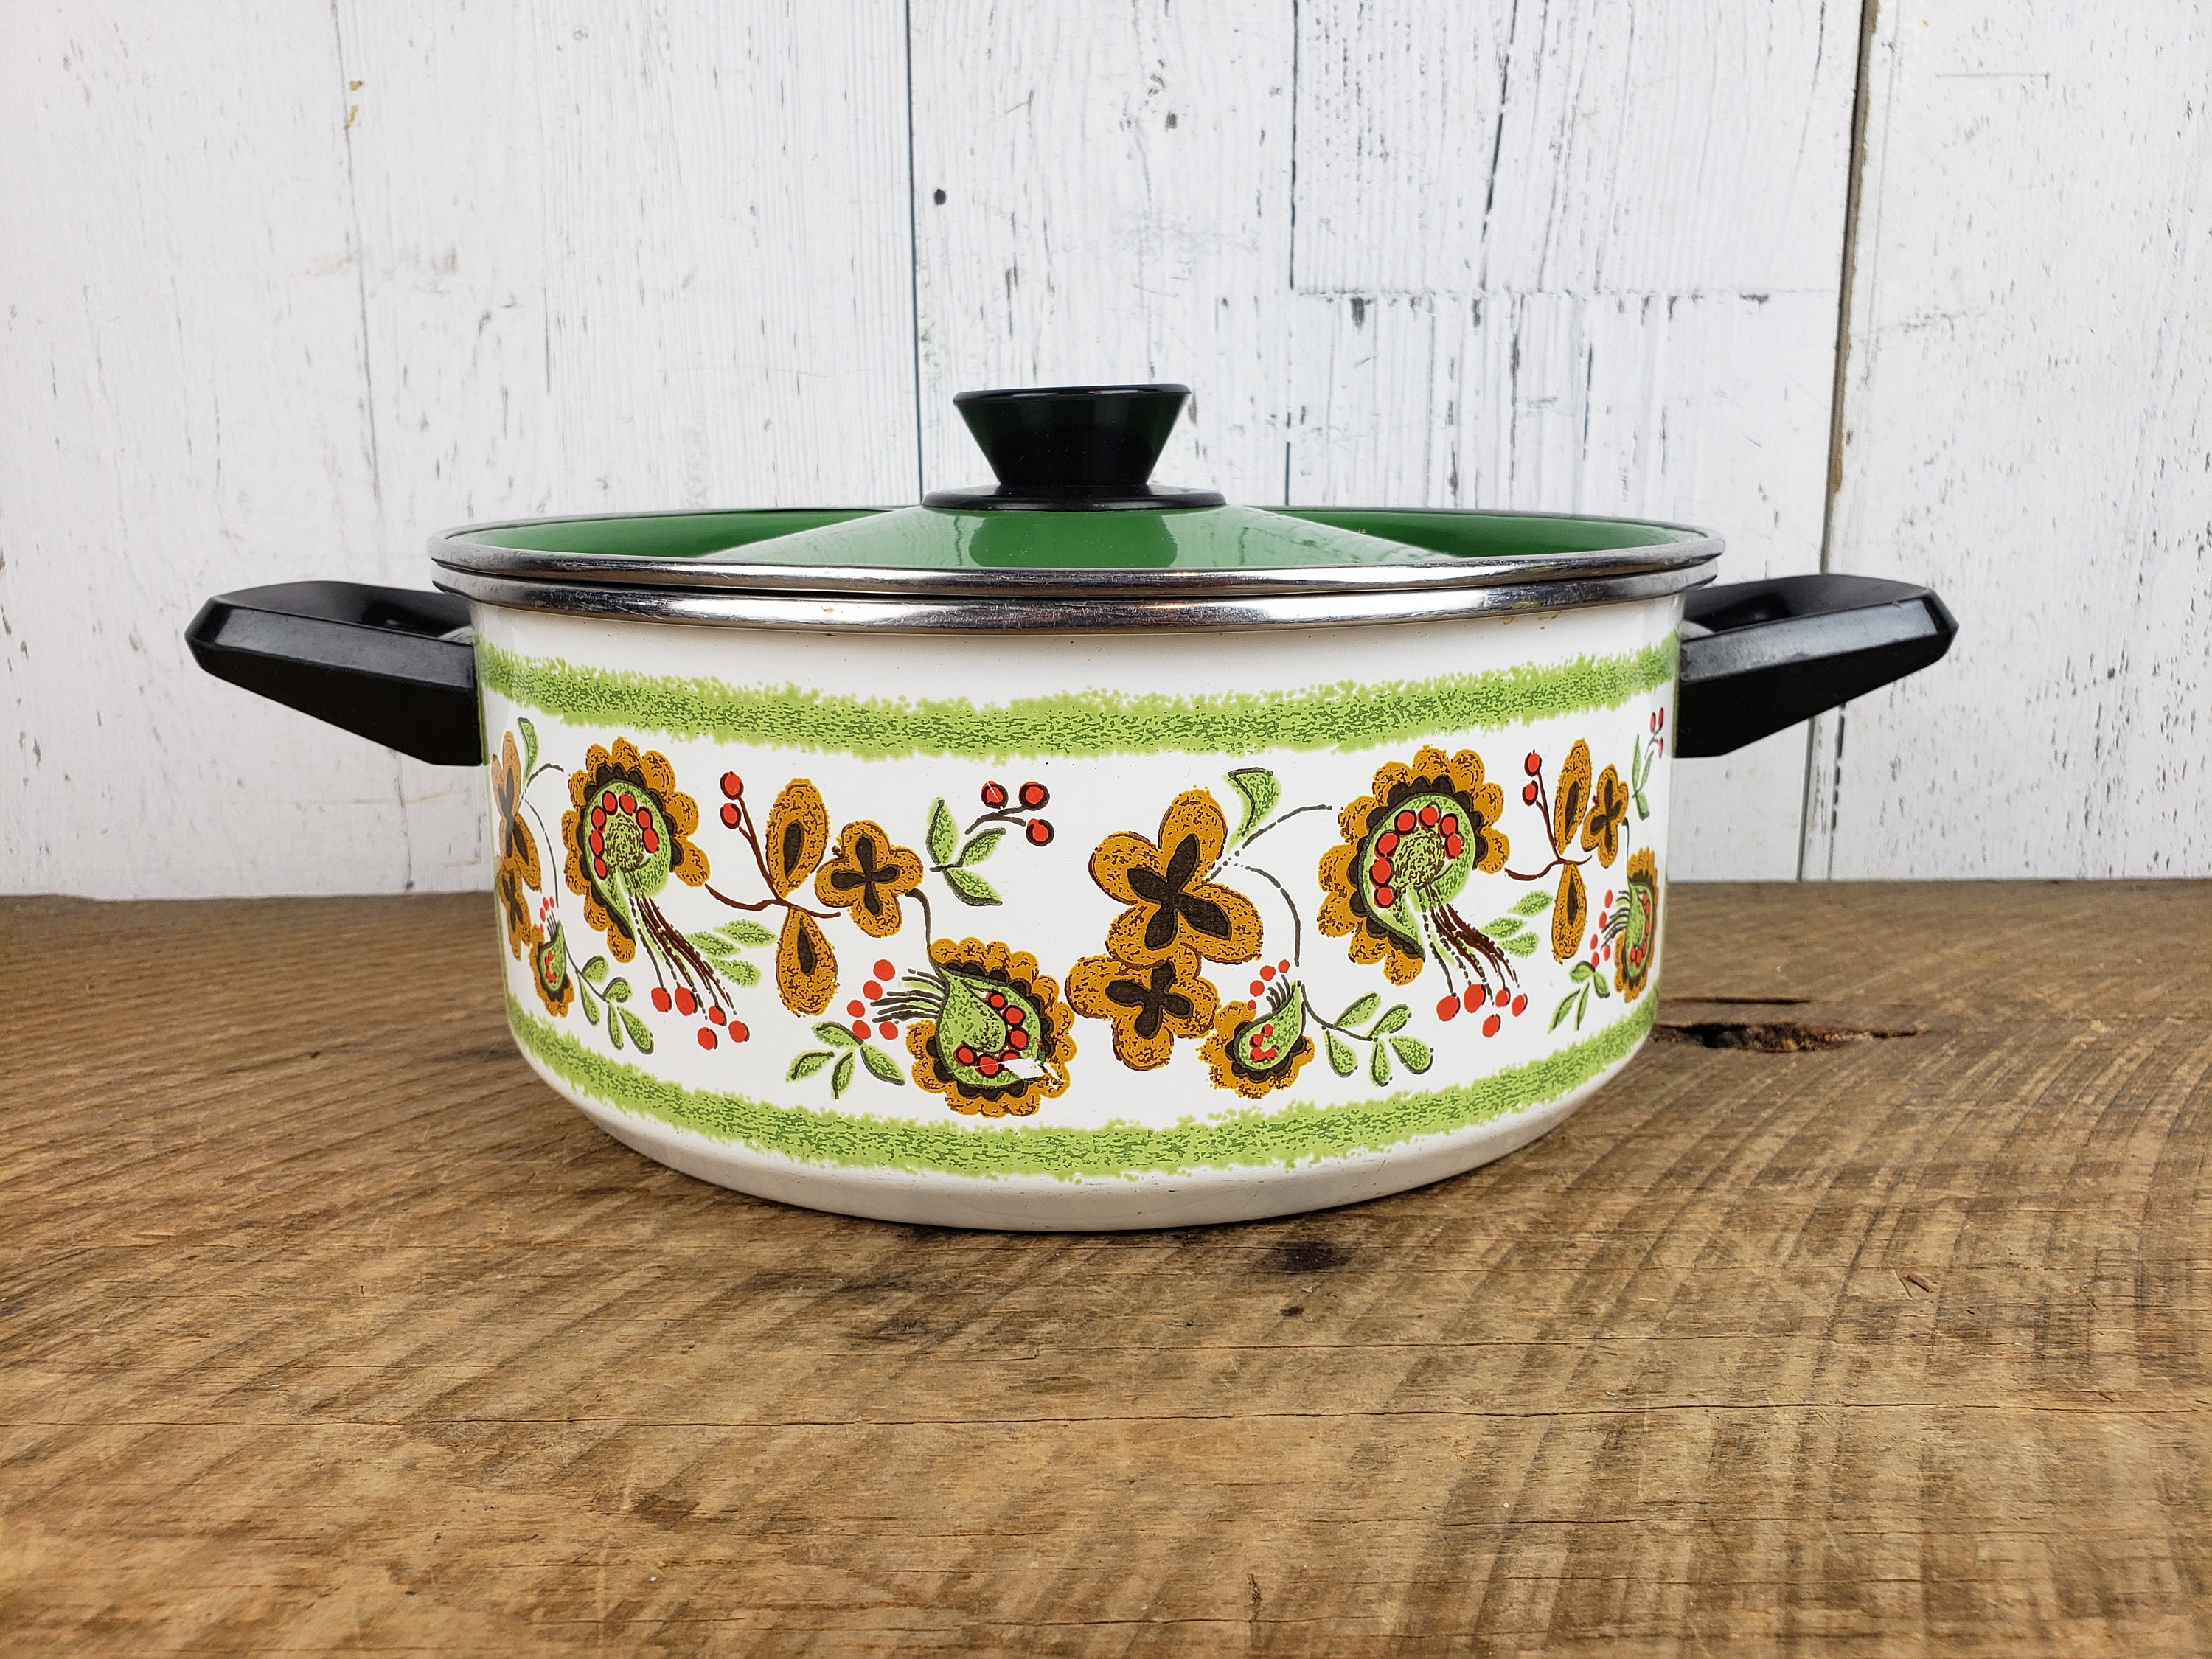 Vintage Enamel Cooking Pot with Lid, White with Orange Daisies, Floral  Pattern Cooking Pot, Mid Century Cookware, Retro Pots and Pan